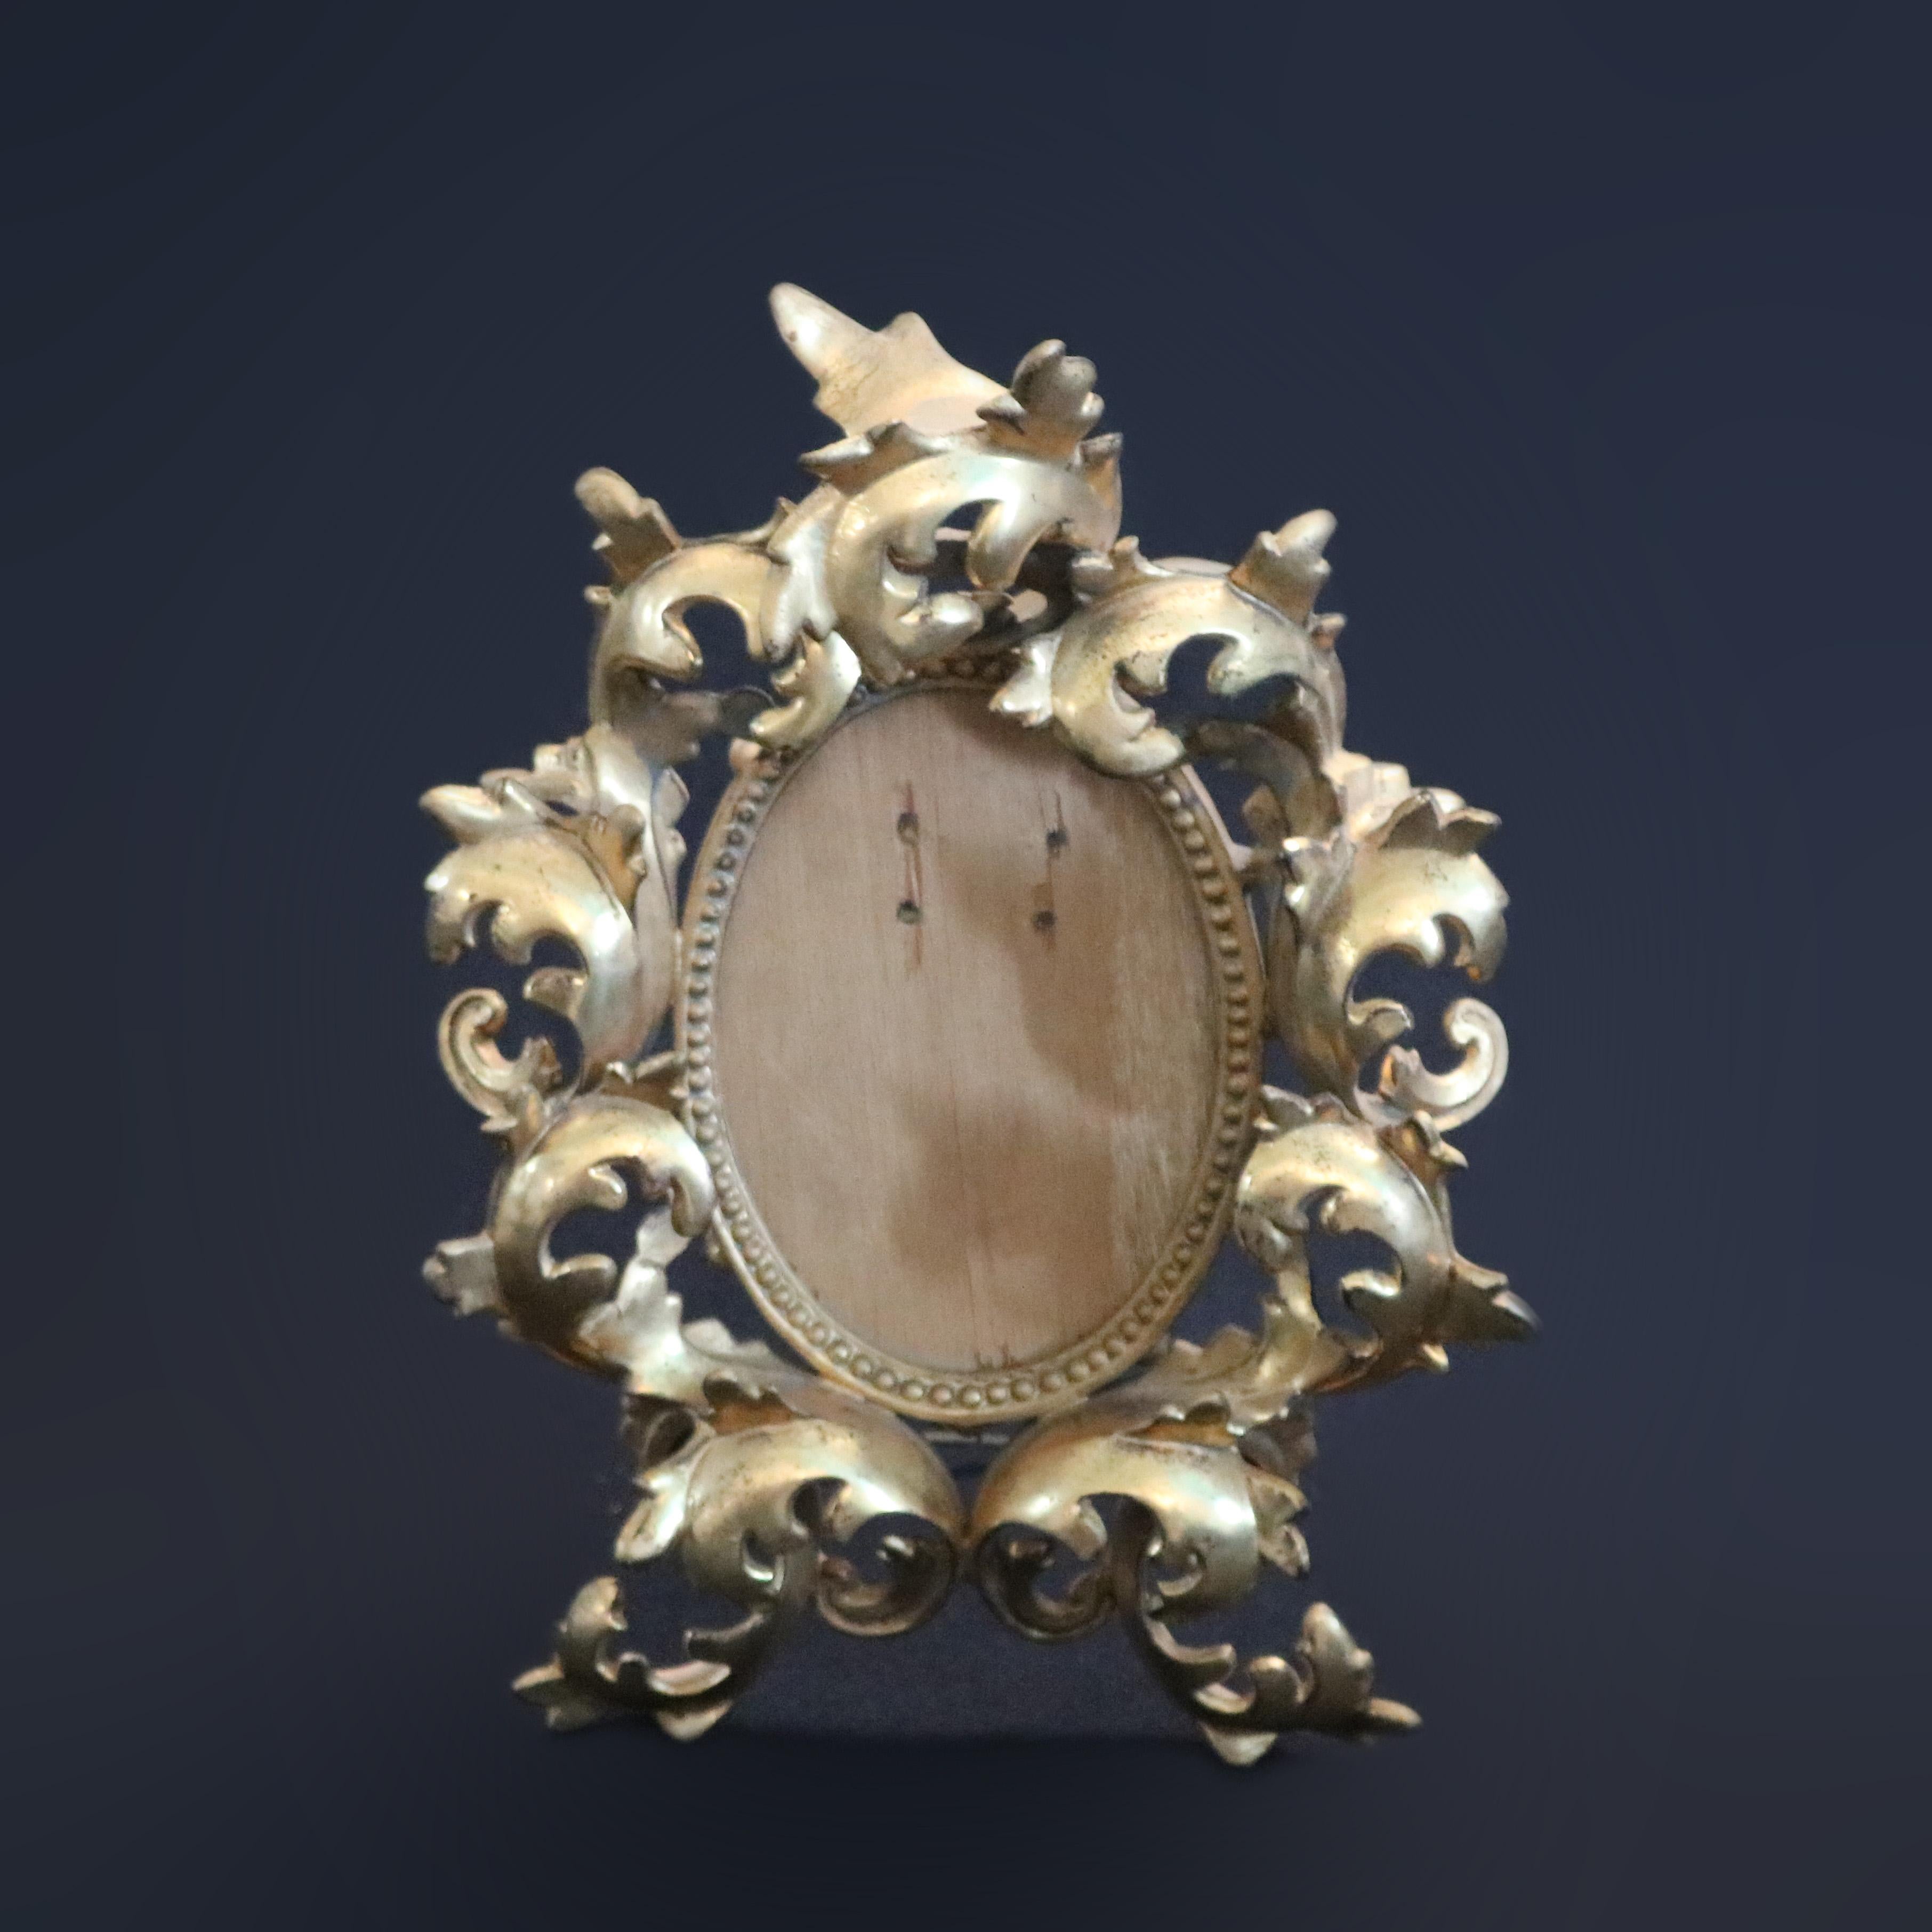 An antique Italian tabletop picture frame offers gilt cast metal foliate form frame with beaded bordering and easel back, circa 1890

Measures: 11.38